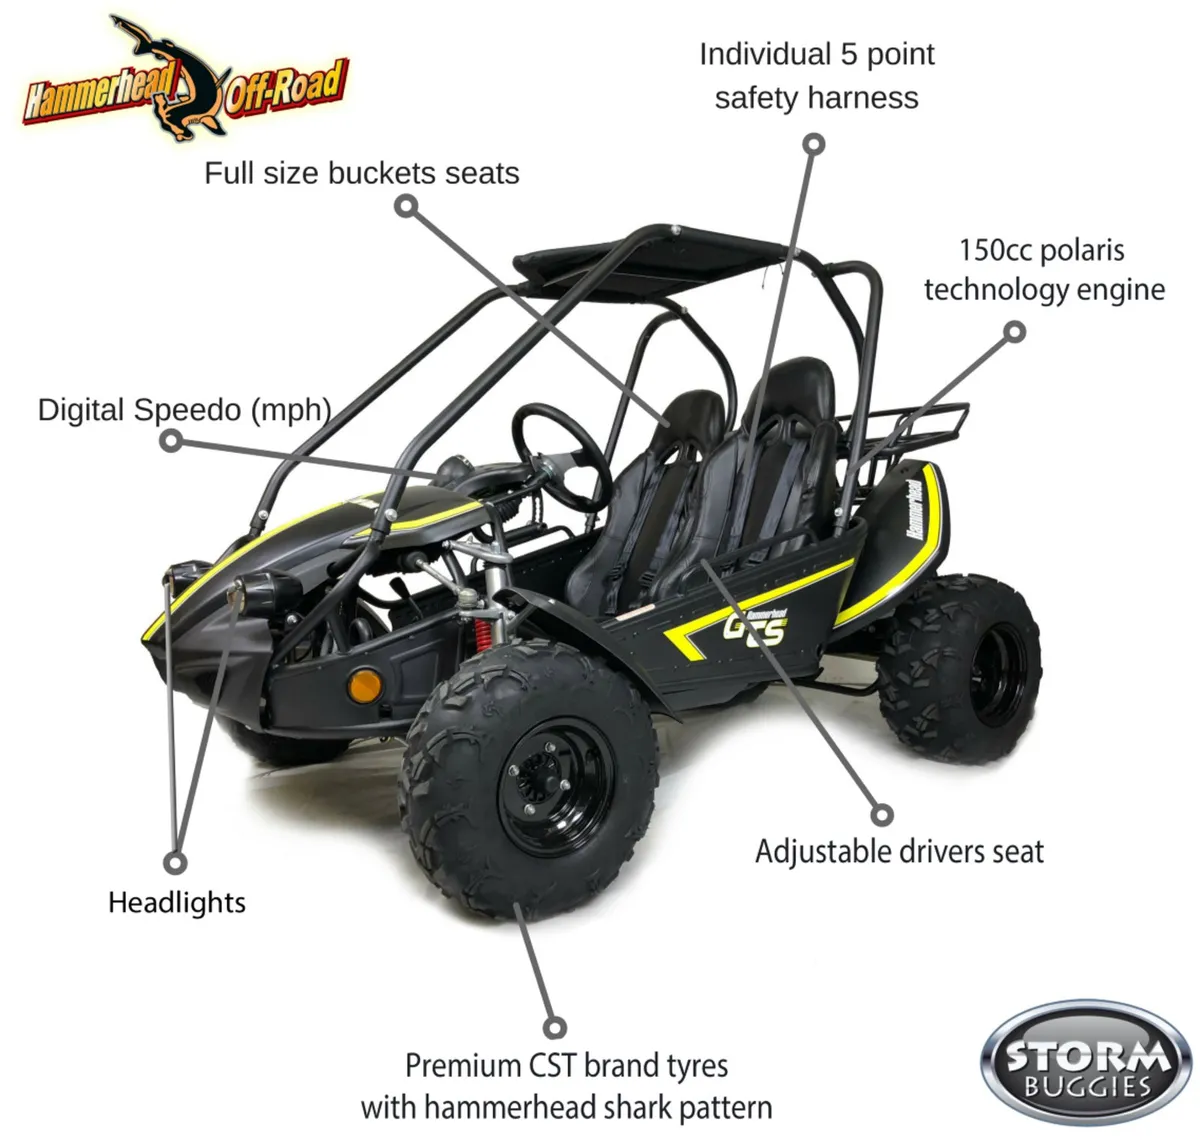 HAMMERHEAD Gts 150 buggy DELIVERY warranty choice - Image 1